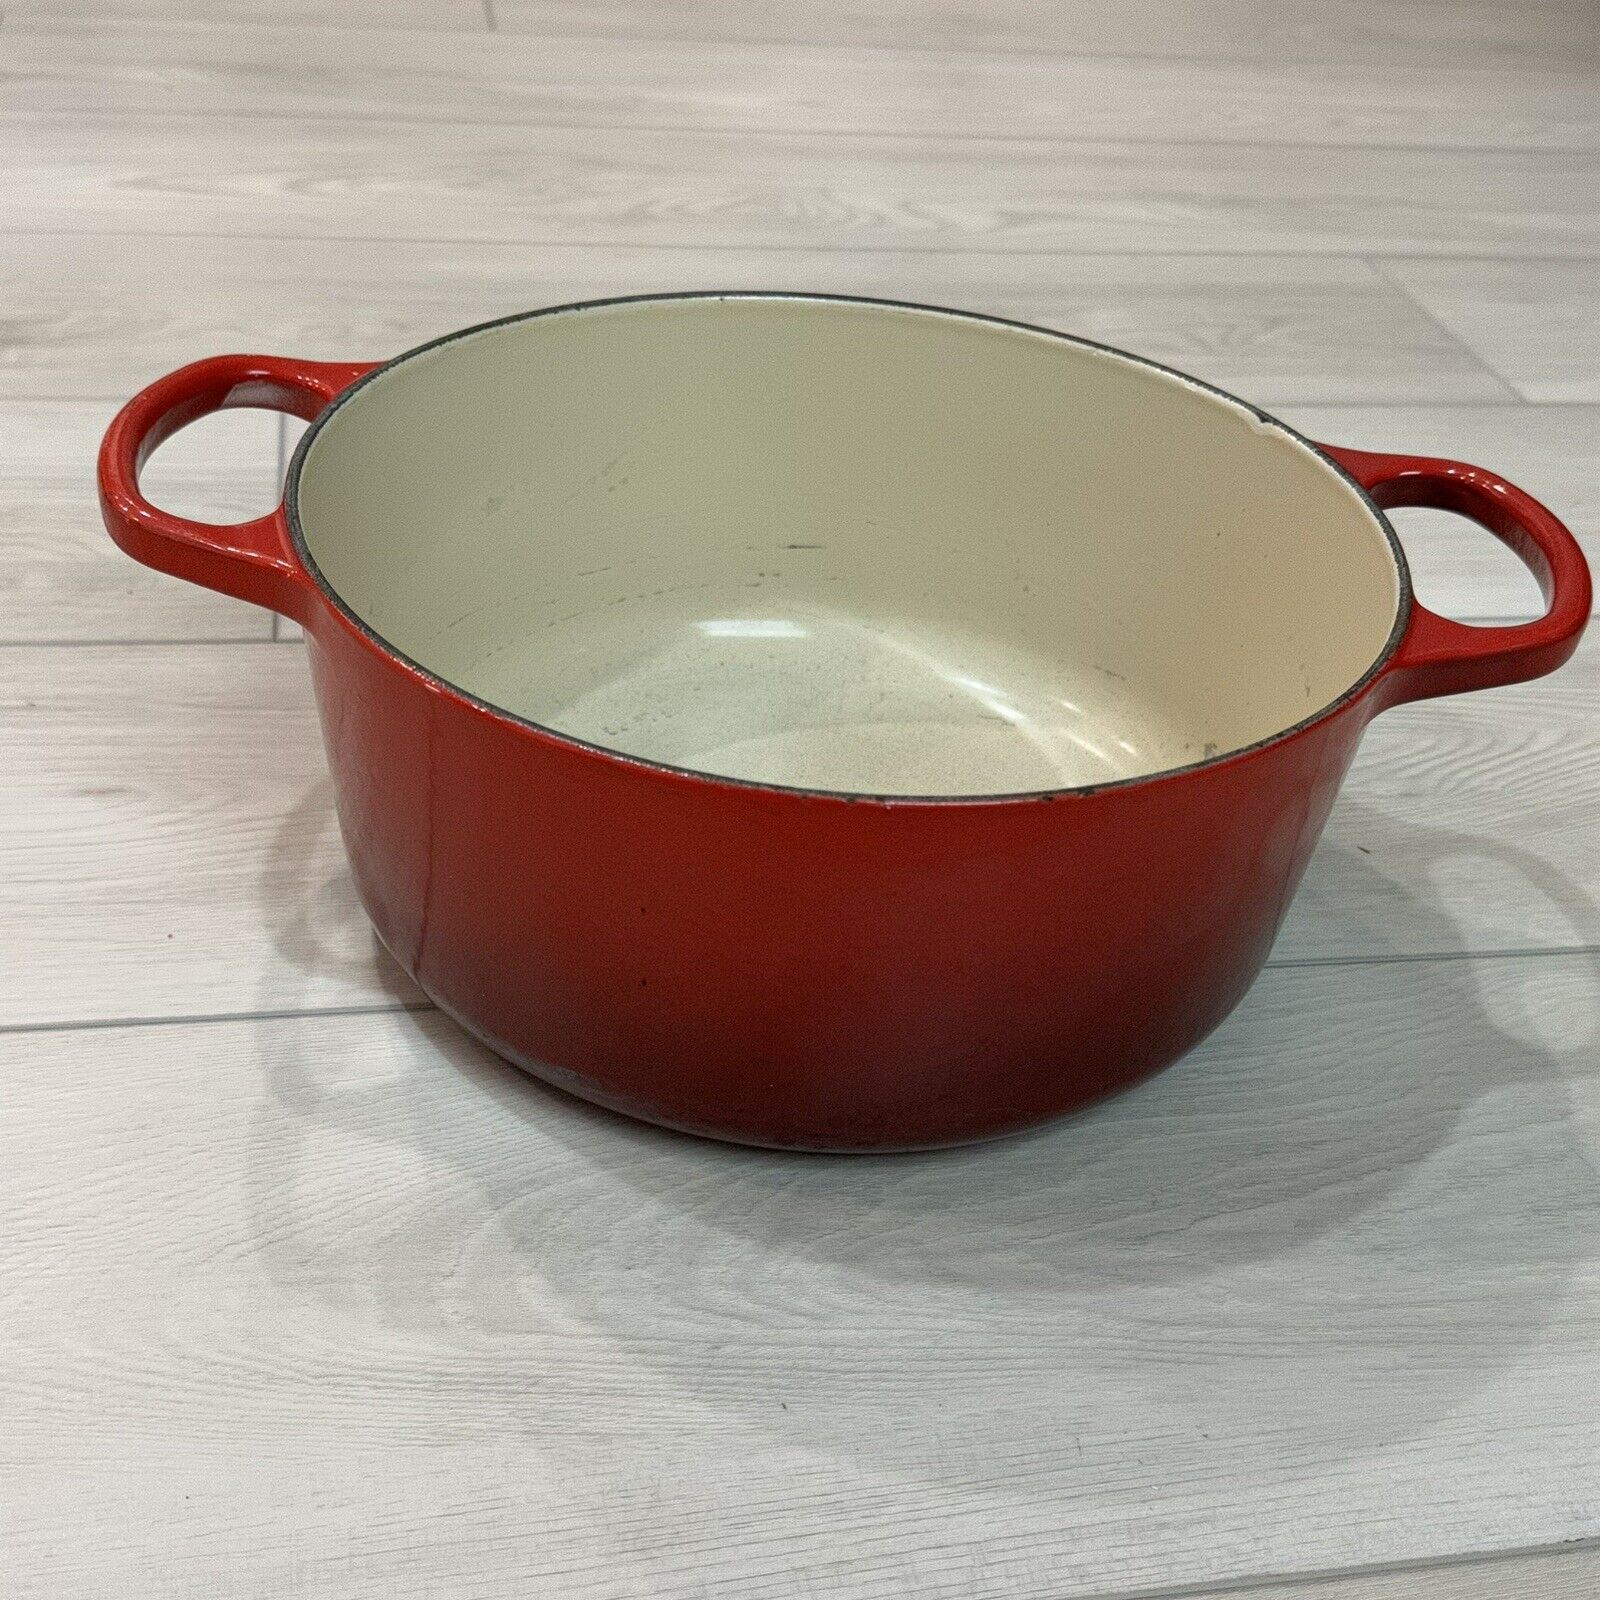 Le Creuset 5.5 Qt Flame Red Enamel Cast Iron Dutch Oven Made In France 26 NO LID